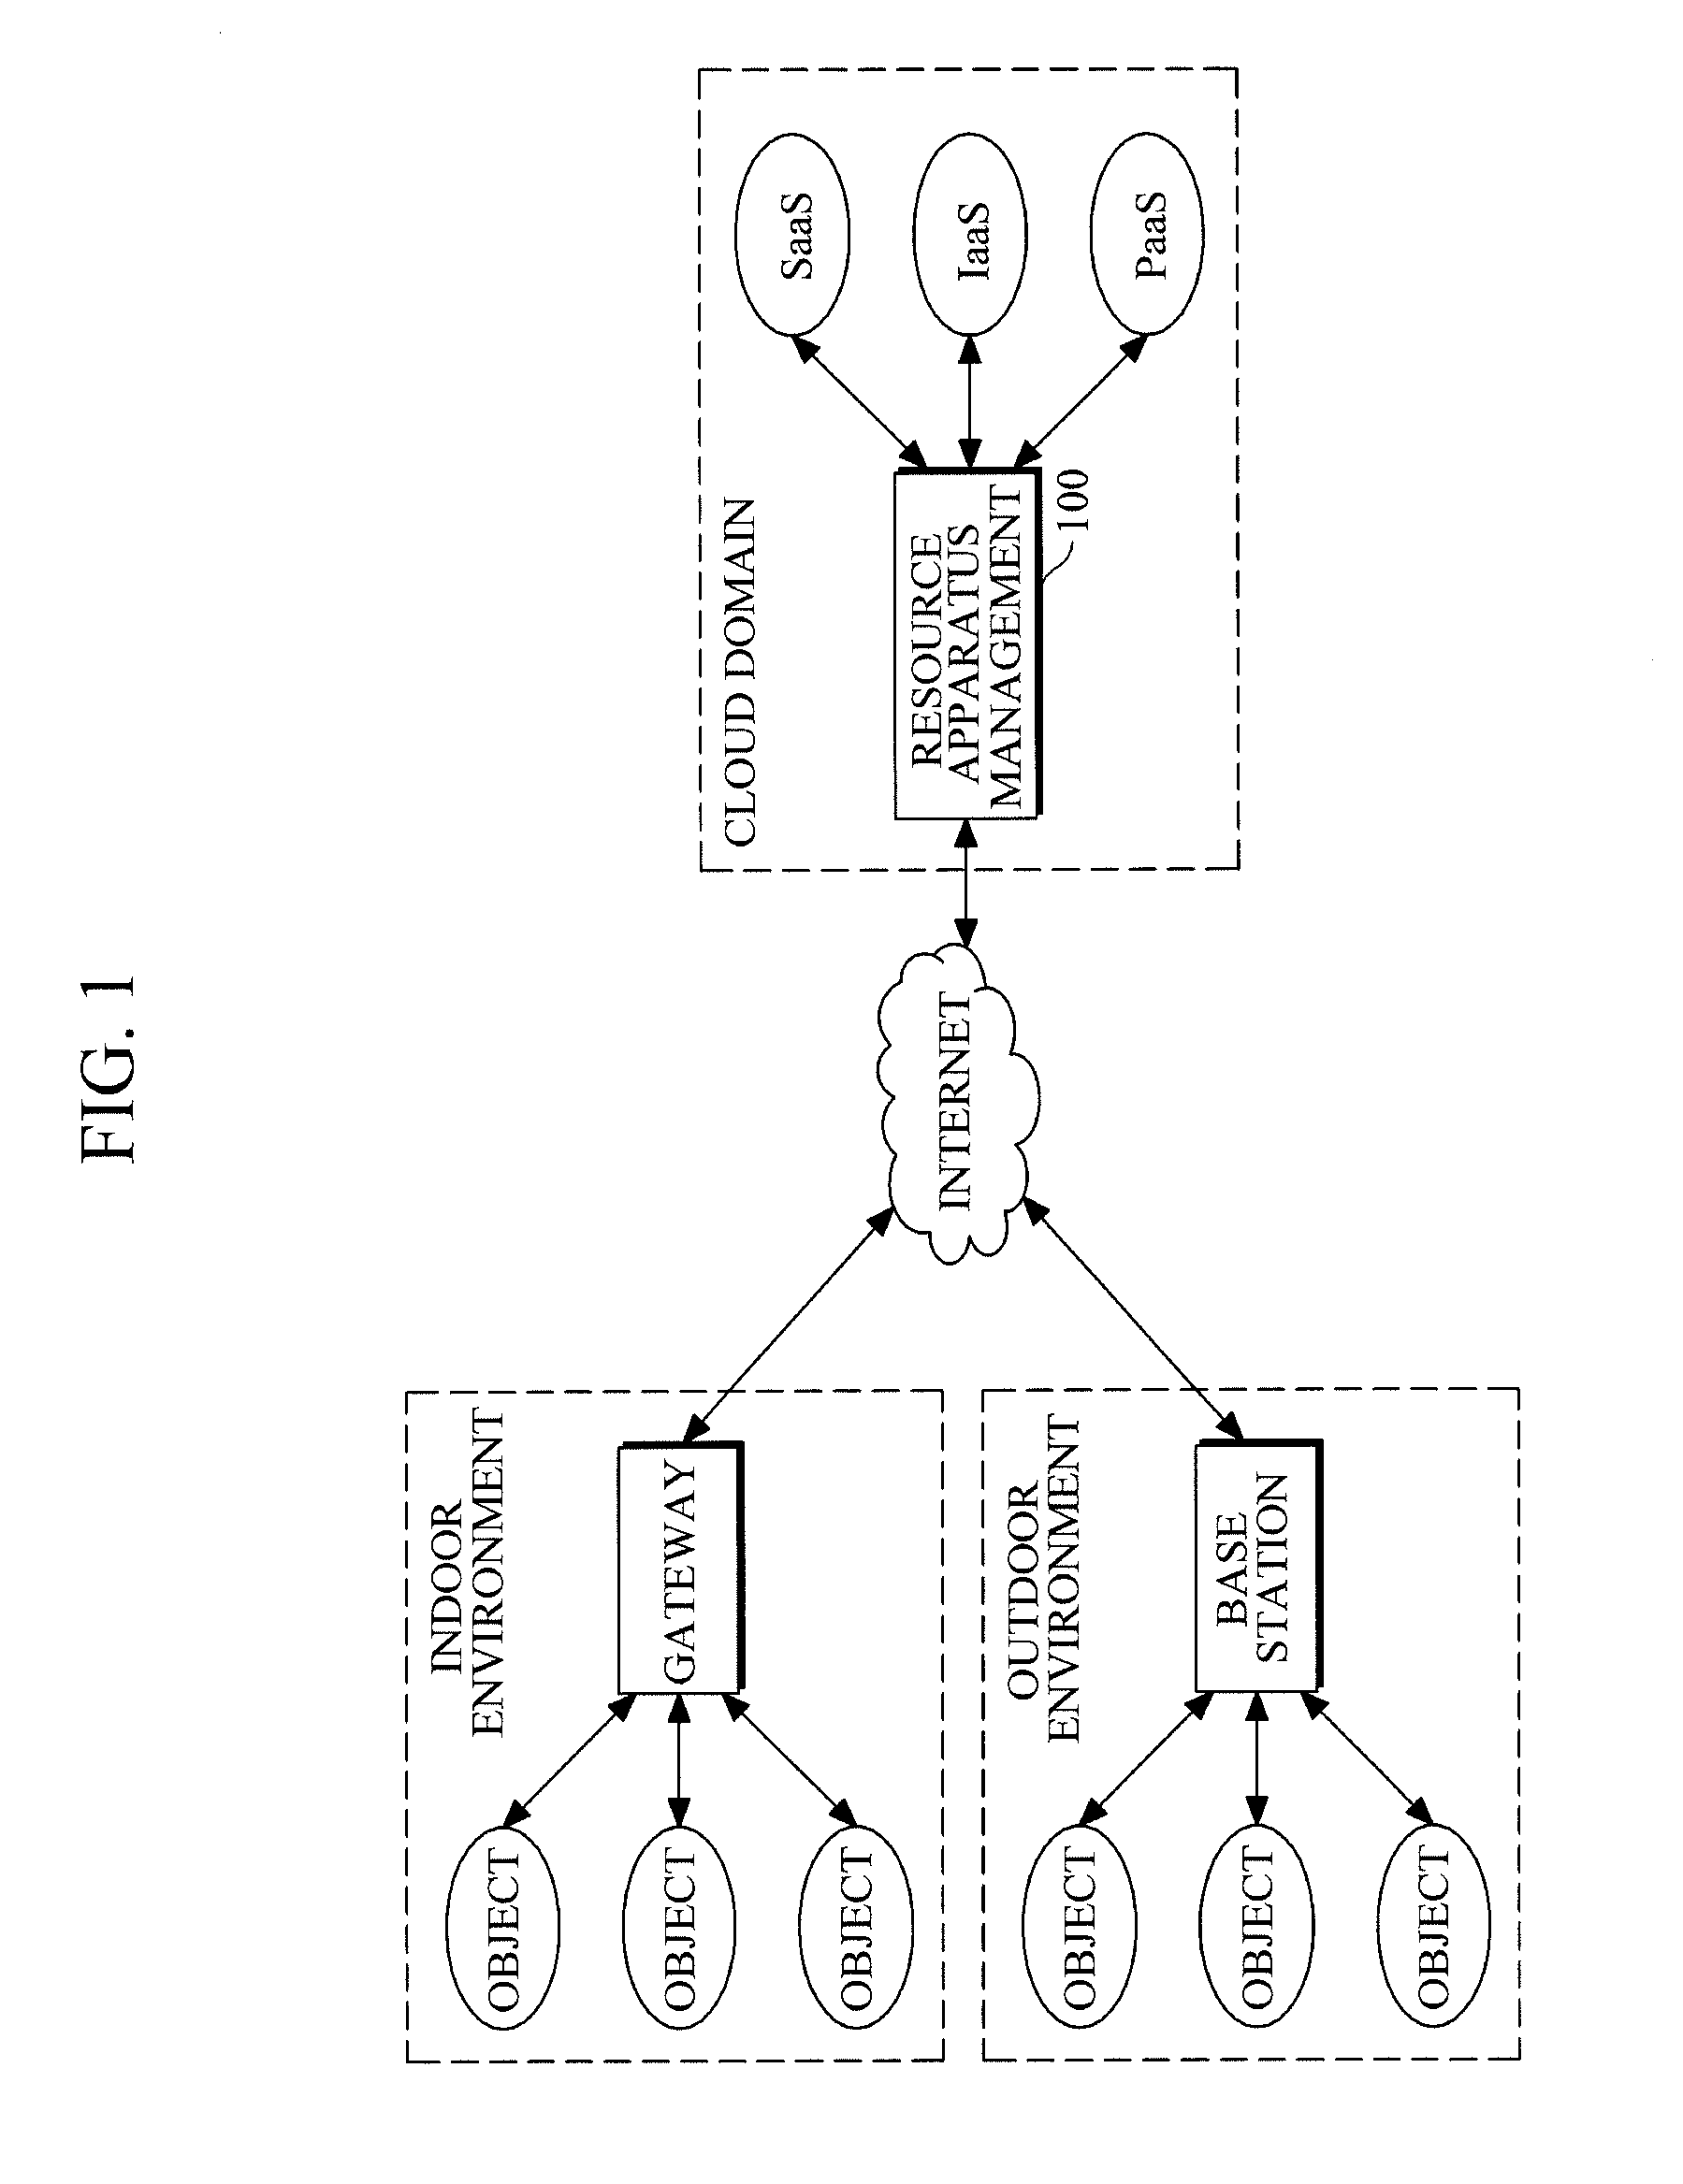 Resource management apparatus and method for supporting cloud-based communication between ubiquitous objects